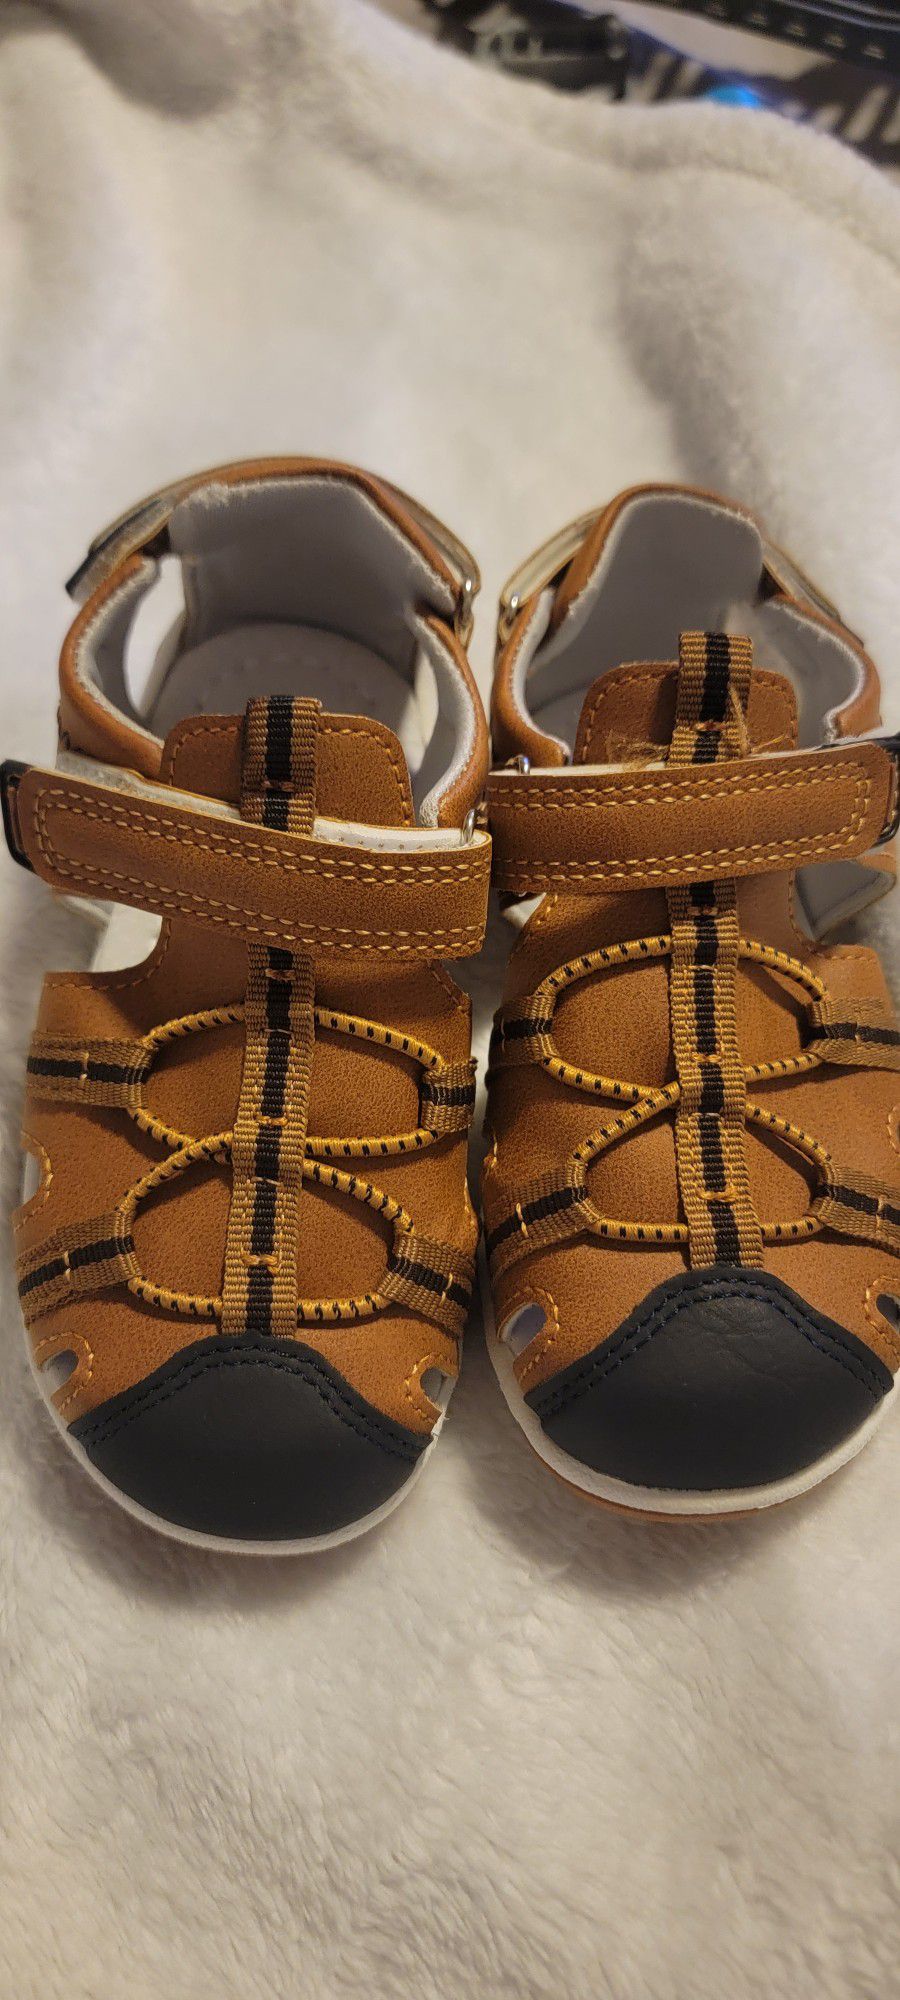 Summer Closed Toe Sandals Toddler Size 9 New